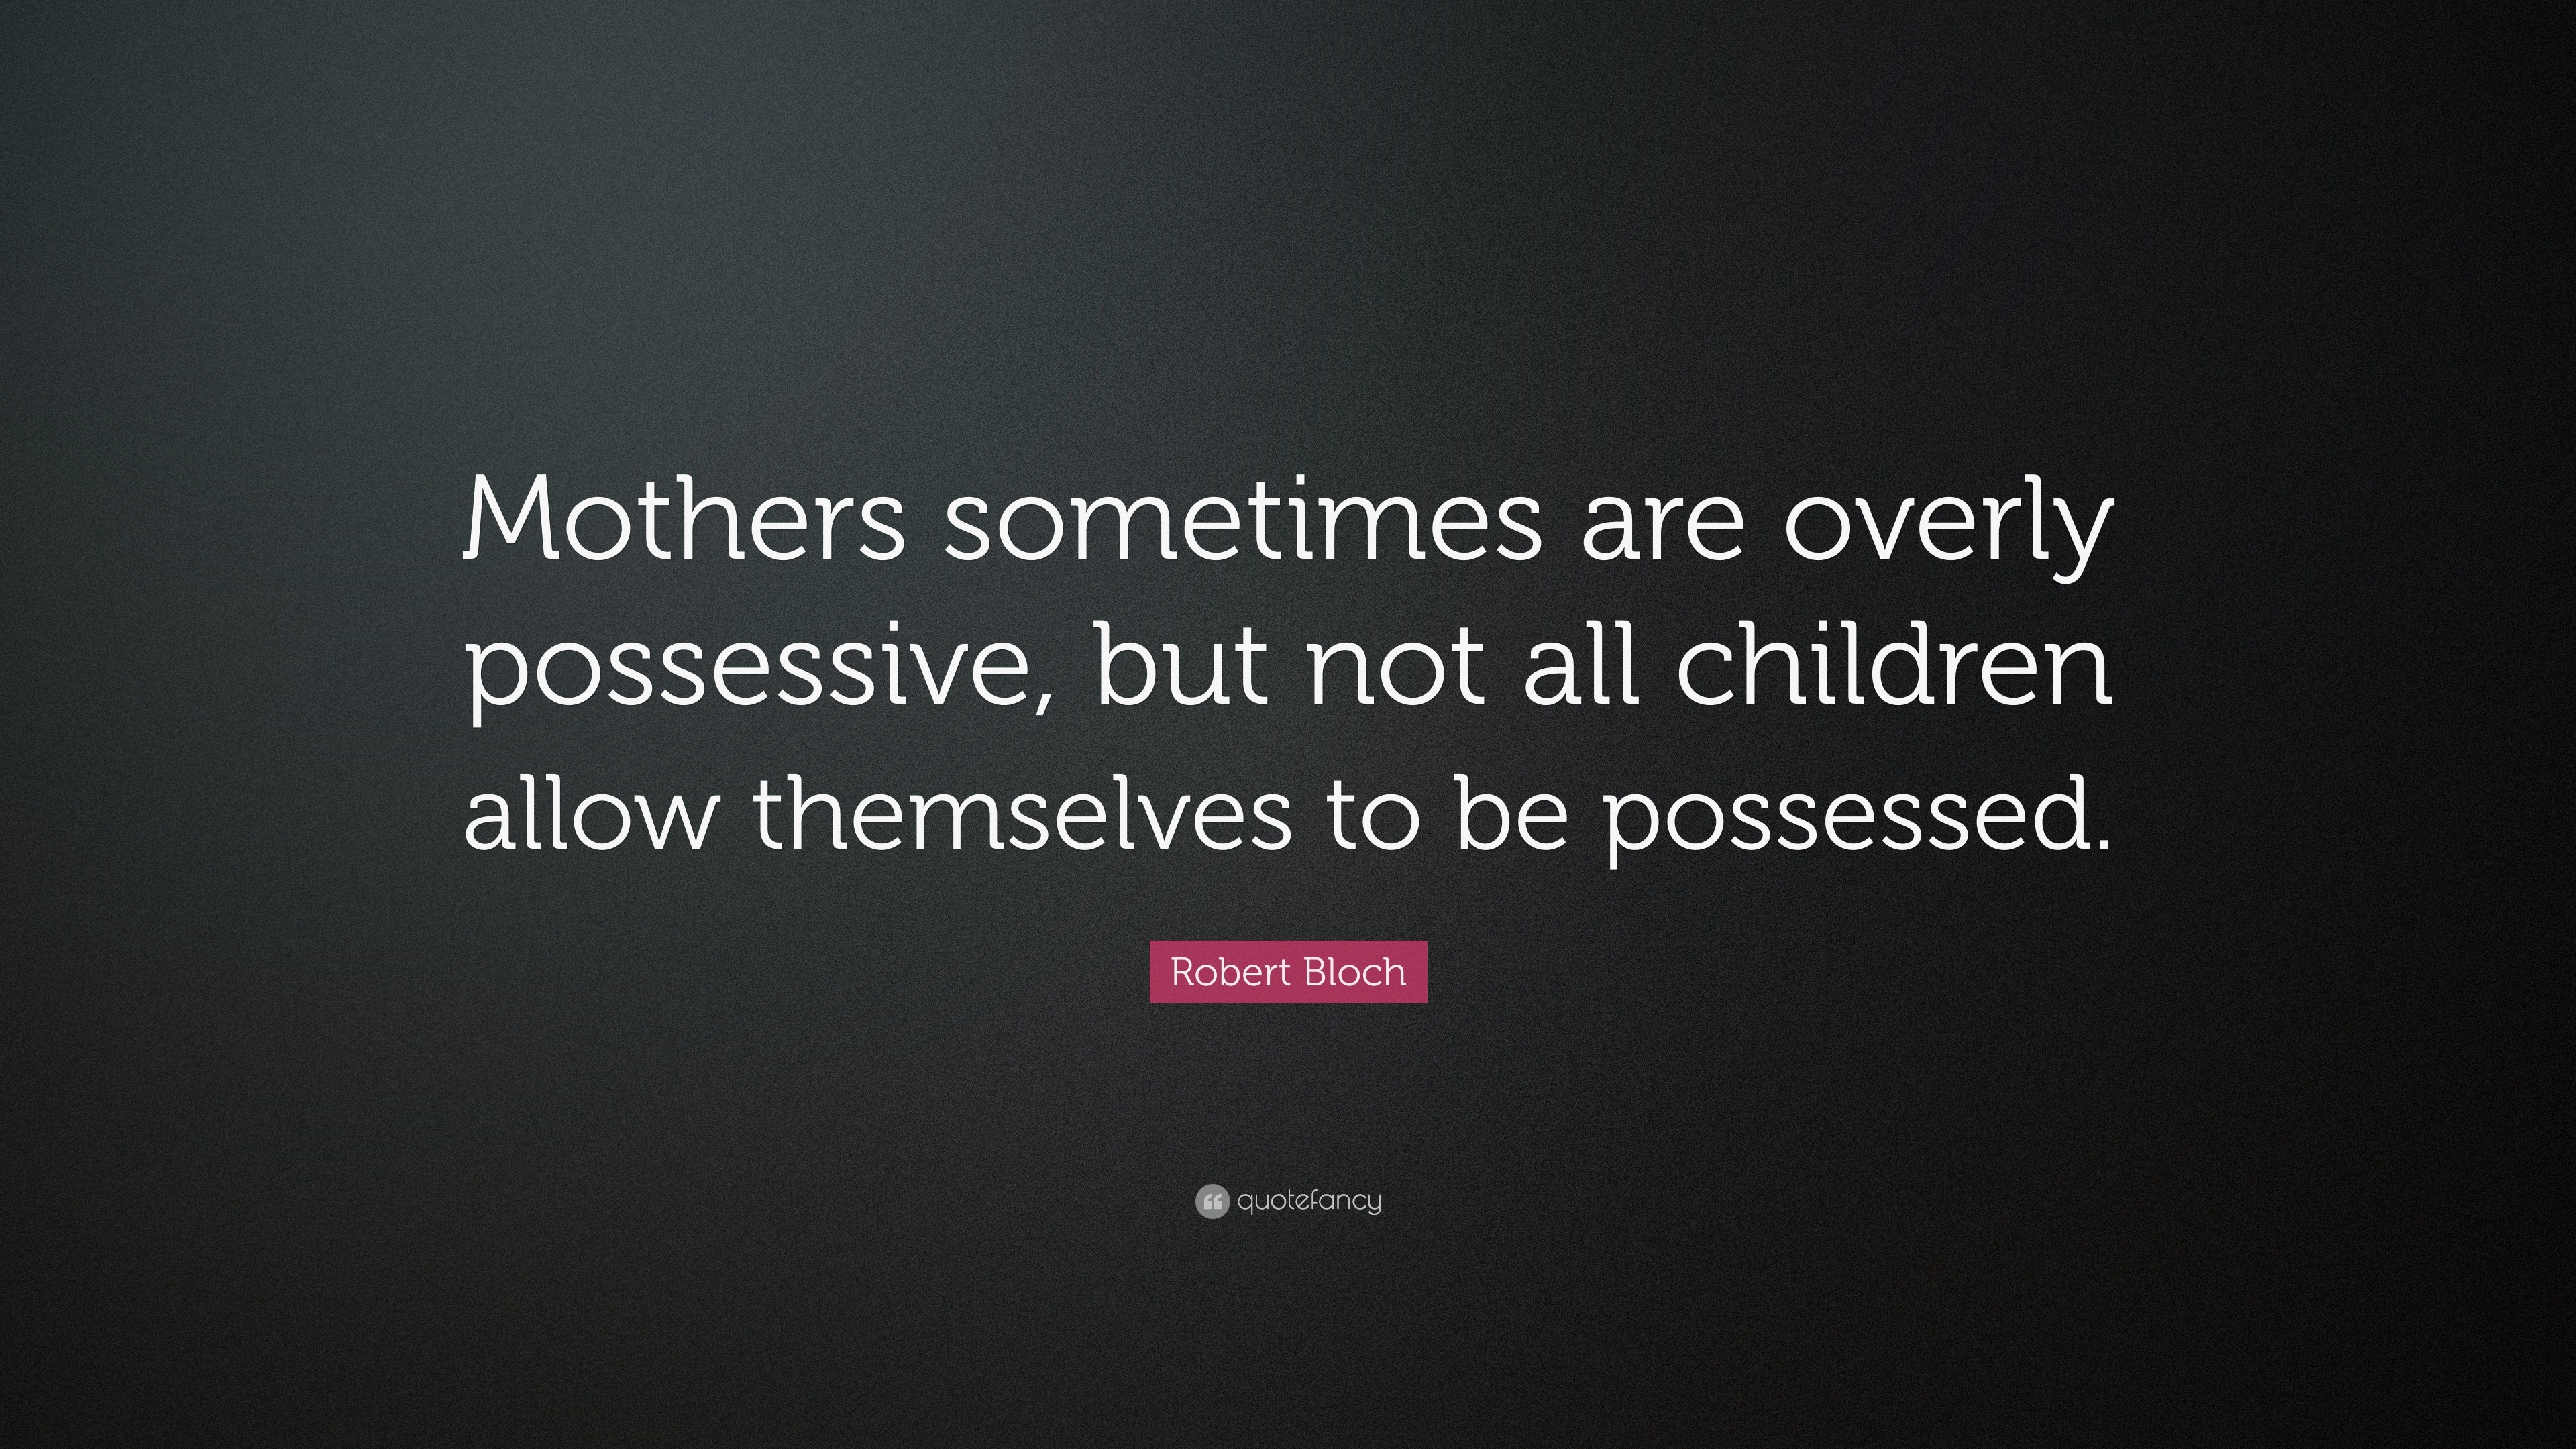 Robert Bloch Quote: “Mothers sometimes are overly possessive, but not ...